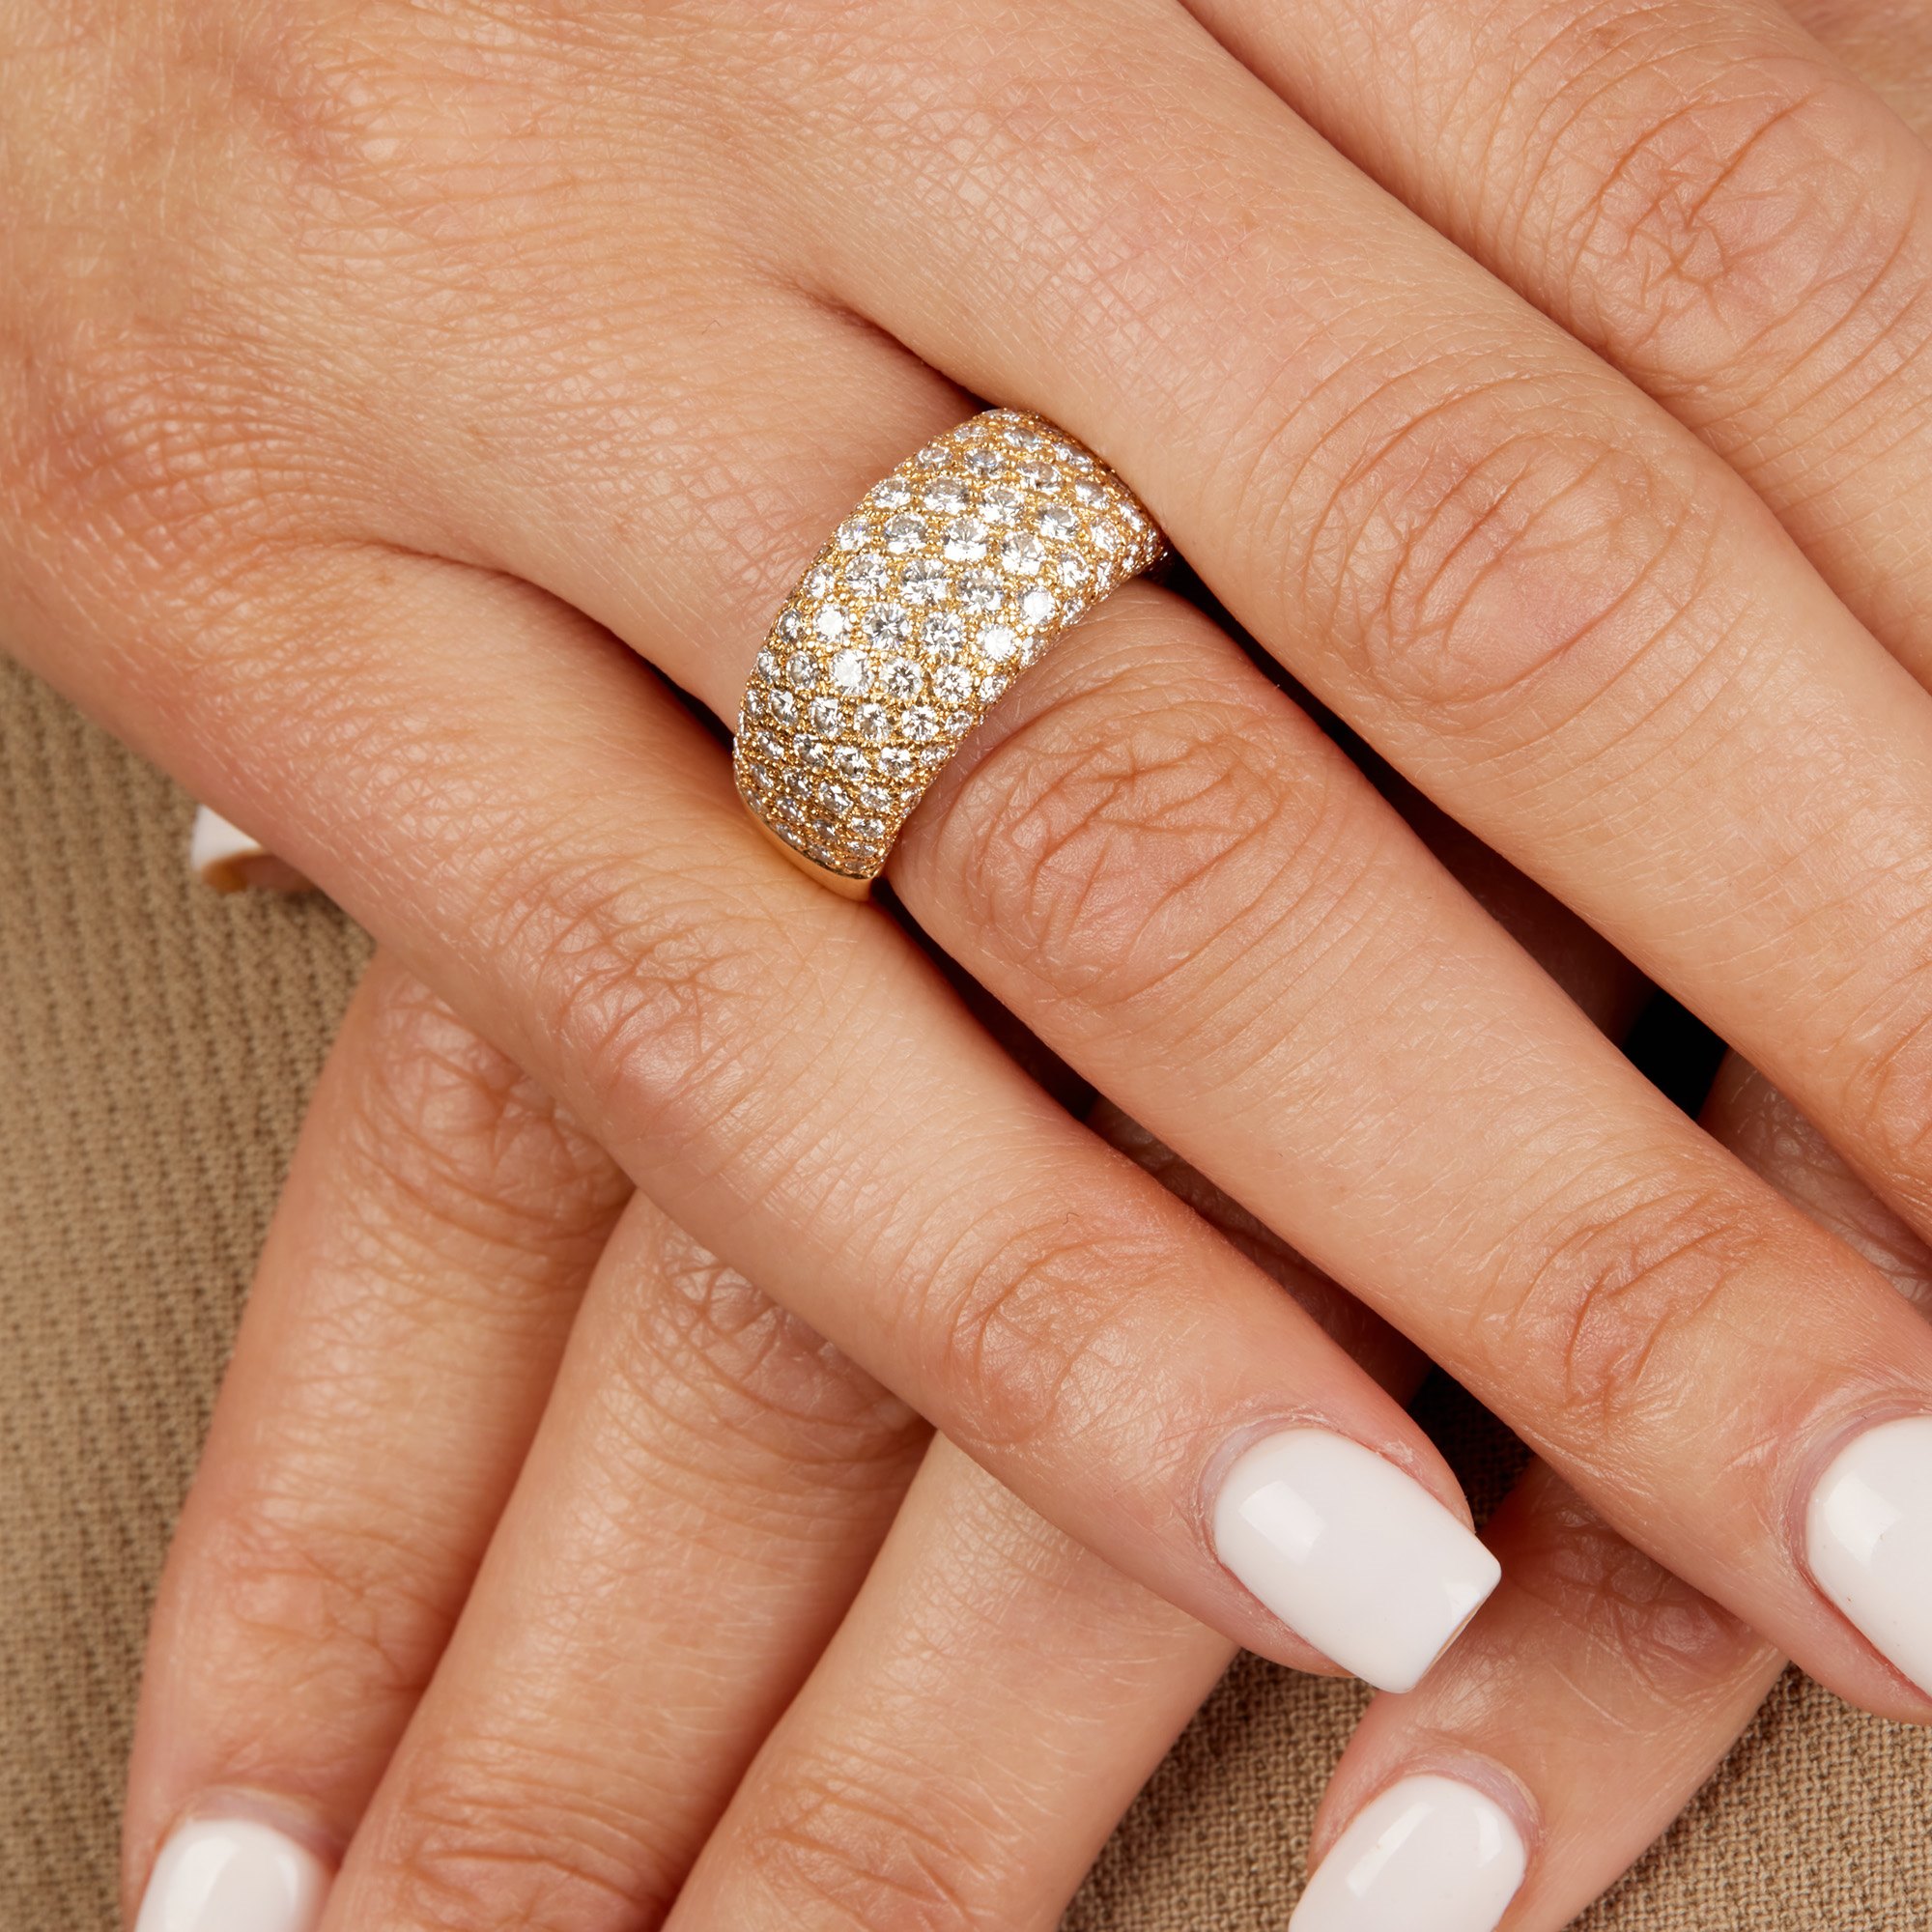 Cartier Pave Bombe Style Ring